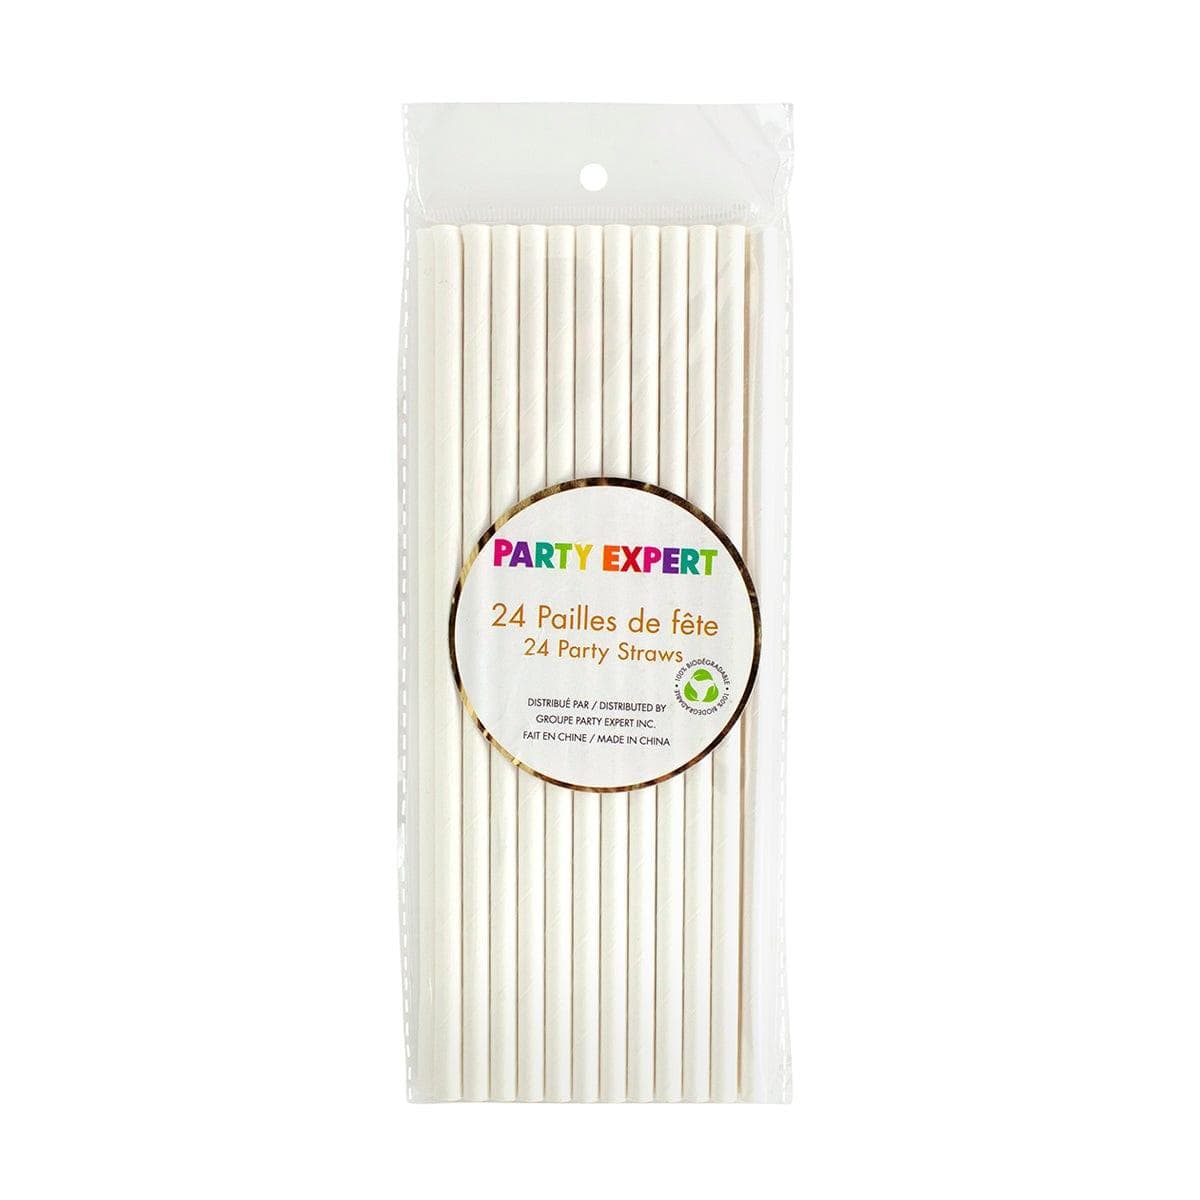 YIWU SANDY PAPER PRODUCTS CO., LTD Everyday Entertaining White Paper Straws, 24 Count